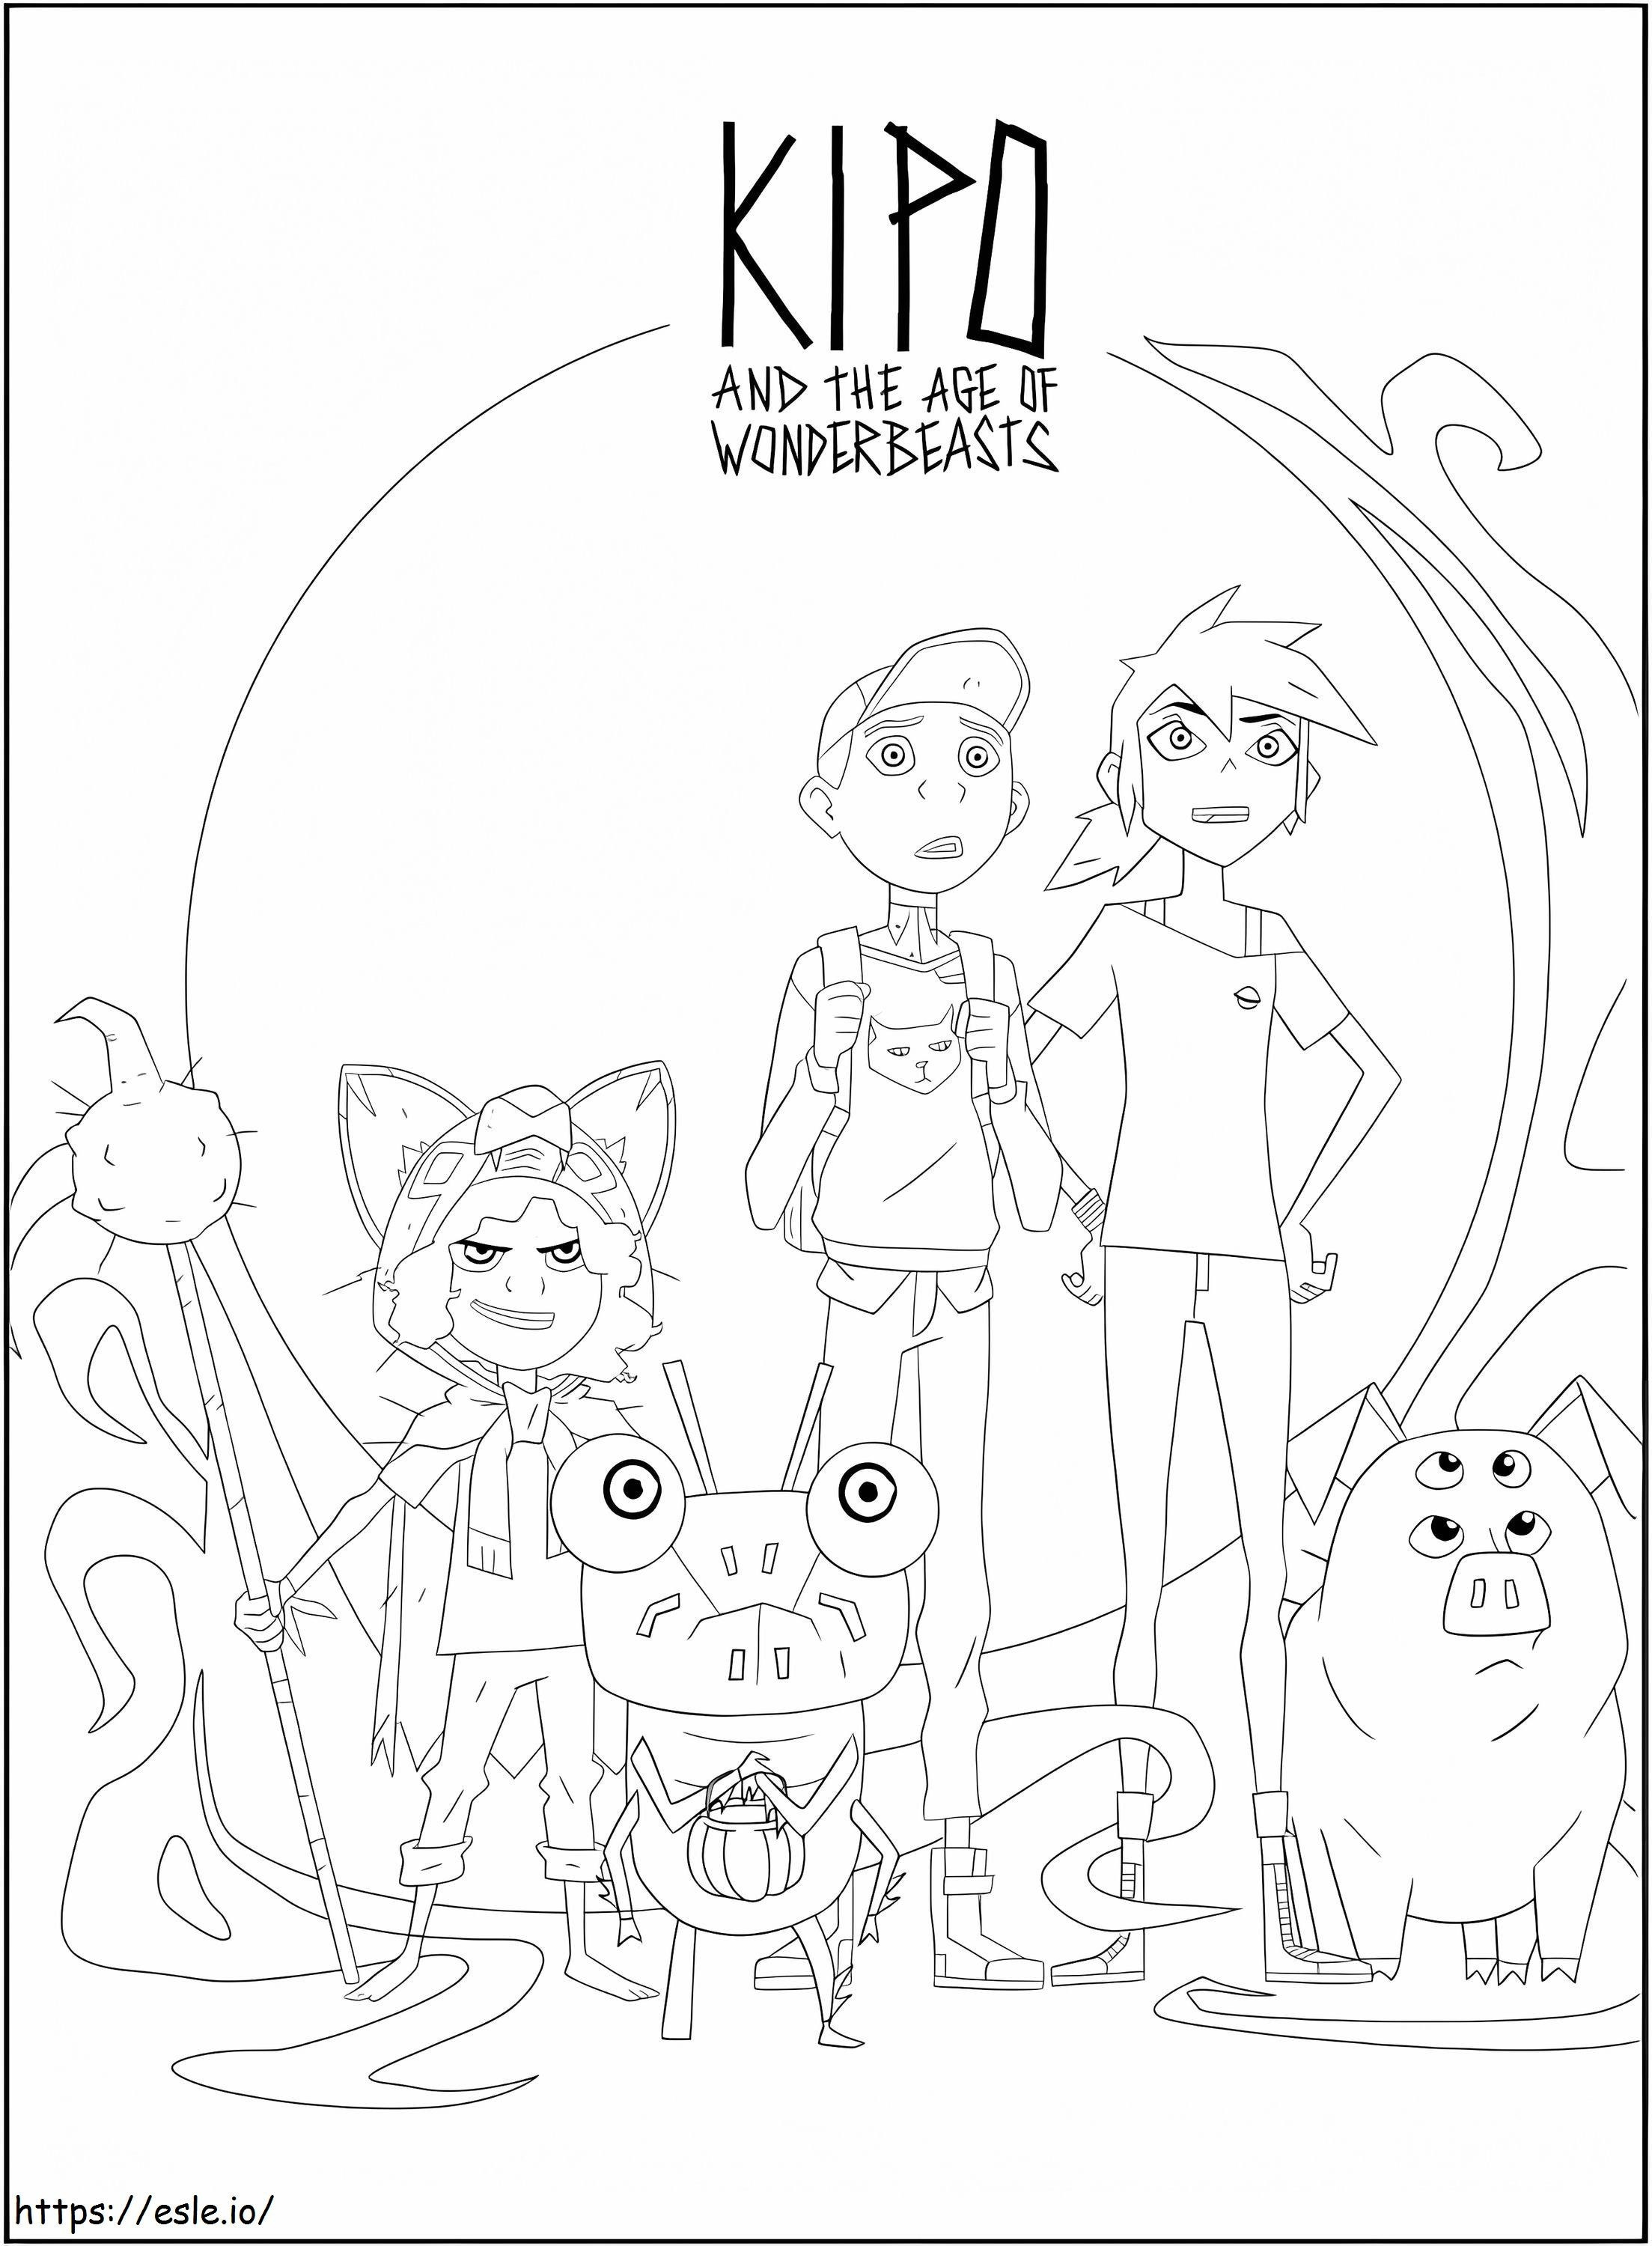 Kipo And The Age Of Wonderbeasts coloring page